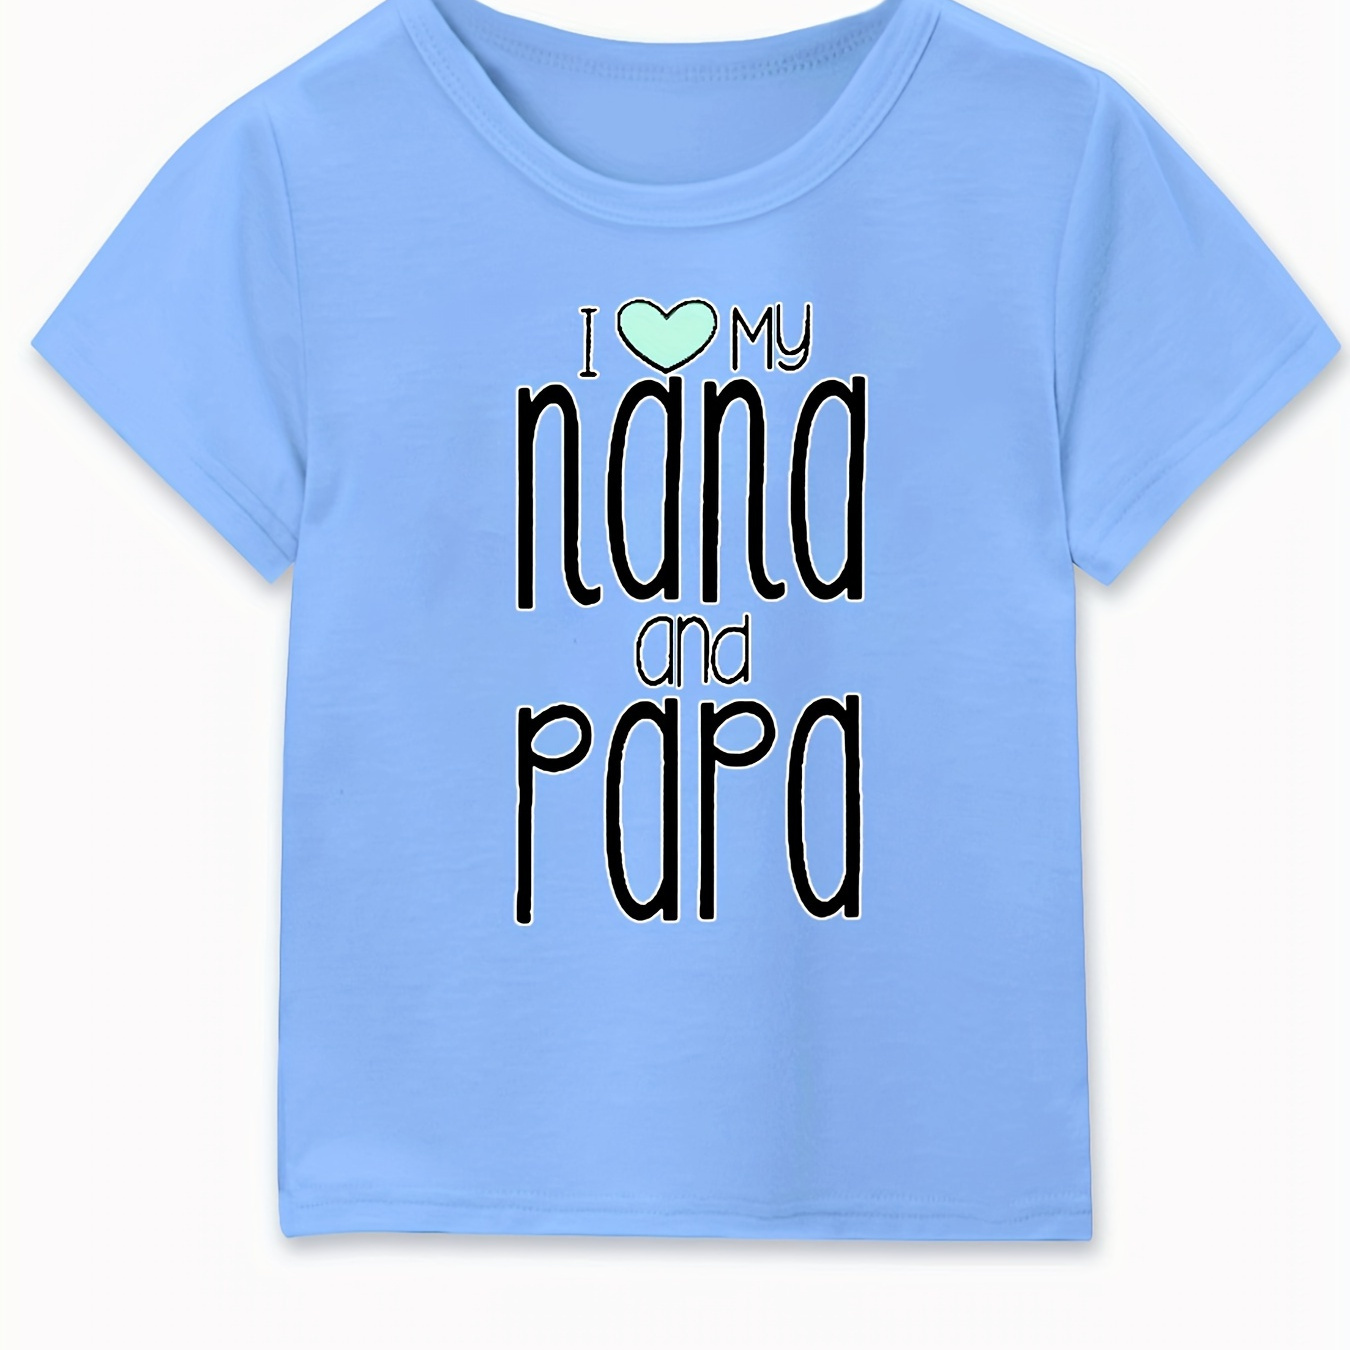 

I Love My Nana And Papa Letter Print Boys Creative T-shirt, Casual Lightweight Comfy Short Sleeve Tee Tops, Kids Clothings For Summer